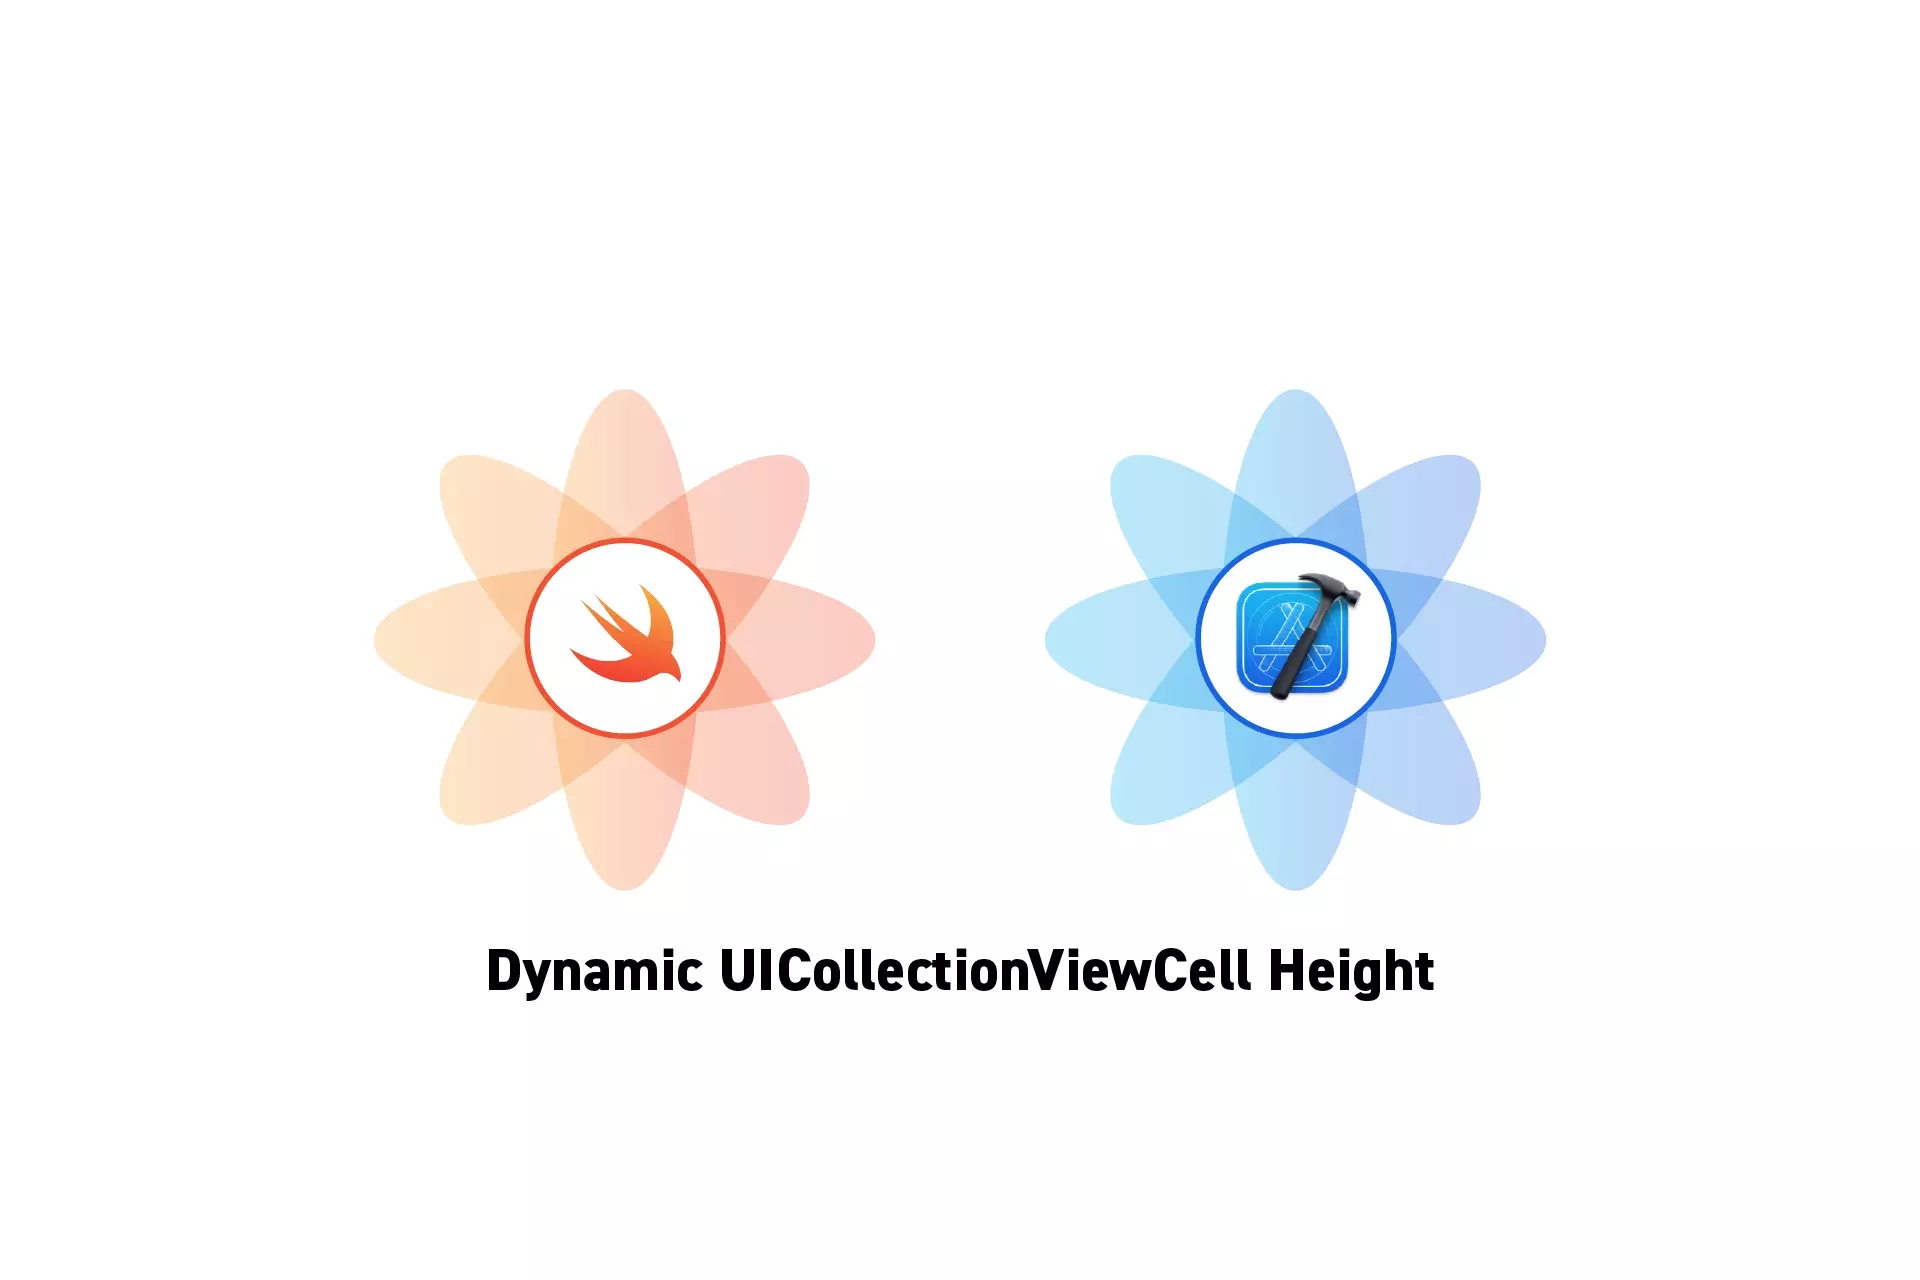 Two flowers that represent Swift and XCode with the text "Dynamic UICollectionViewCell Height" beneath them.